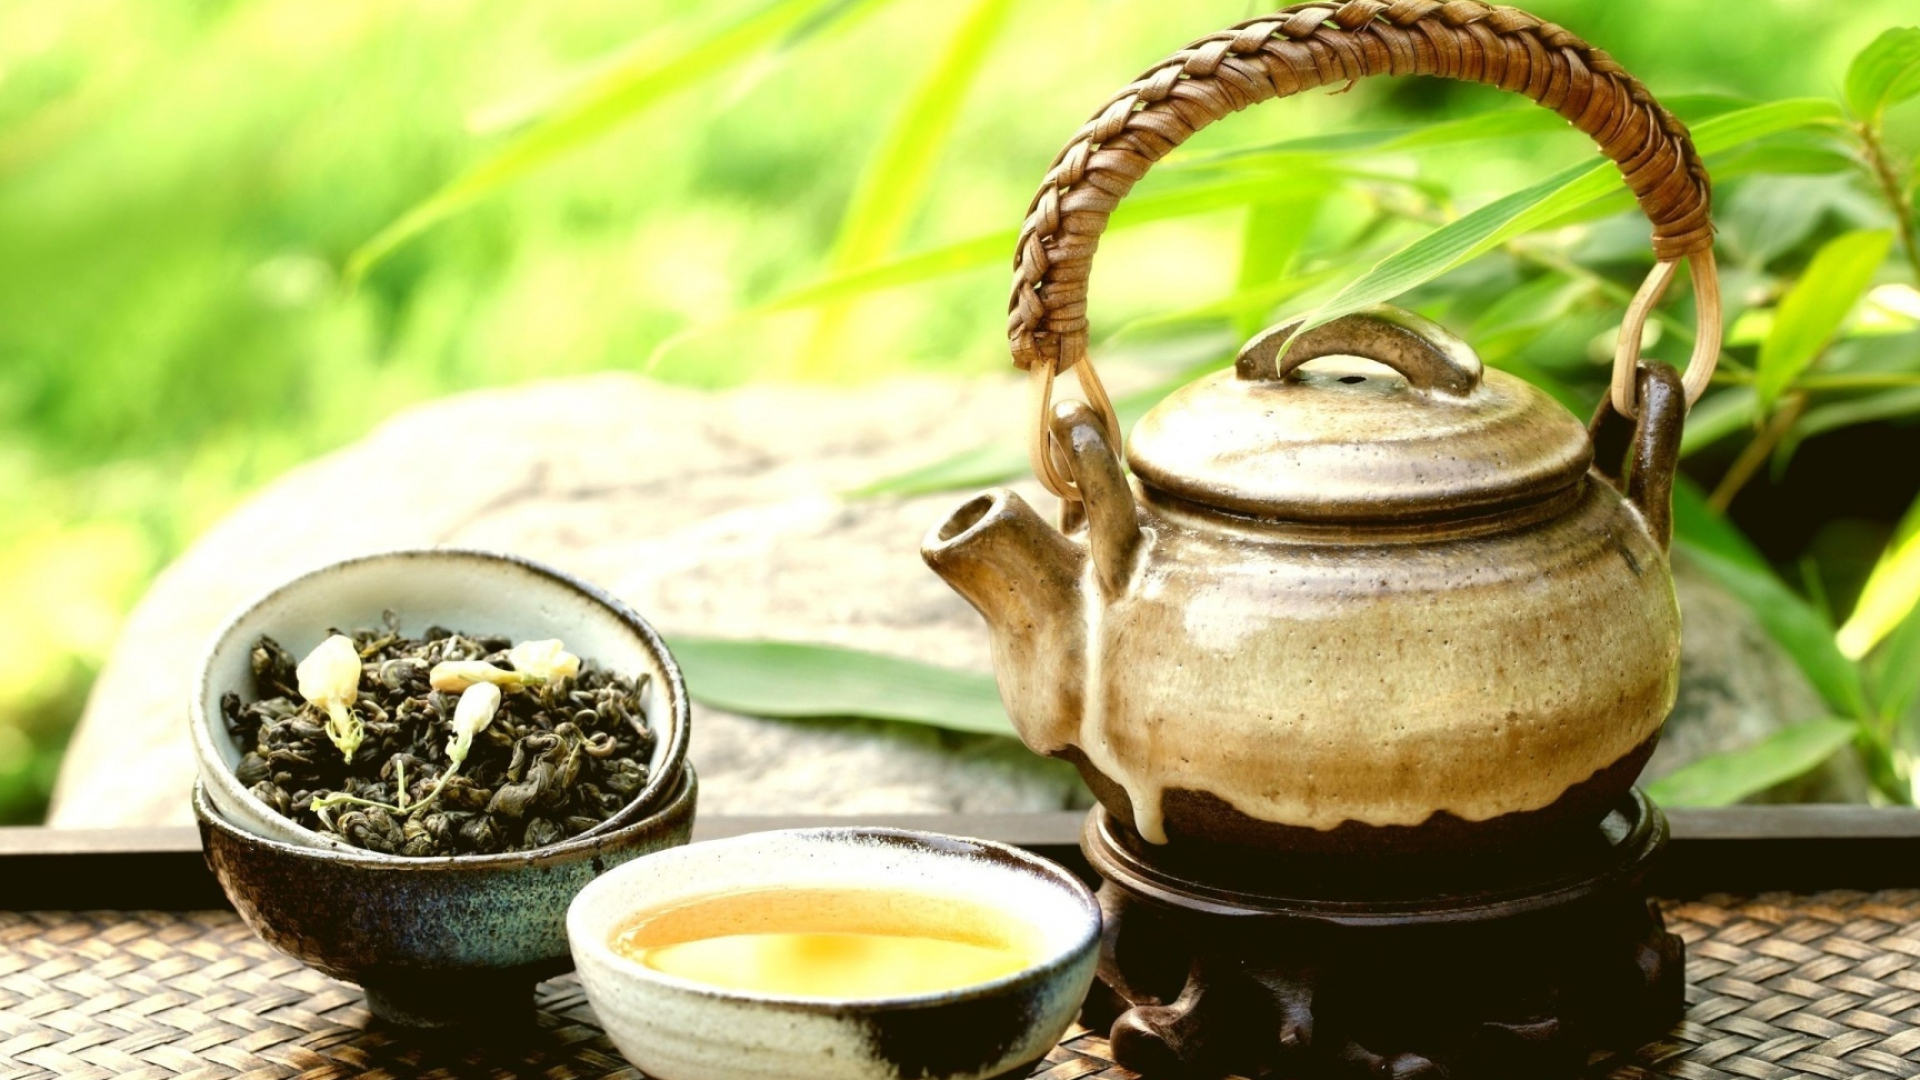 Tea: Oolong, Camellia sinensis plant, Dried leaves and leaf buds. 1920x1080 Full HD Background.